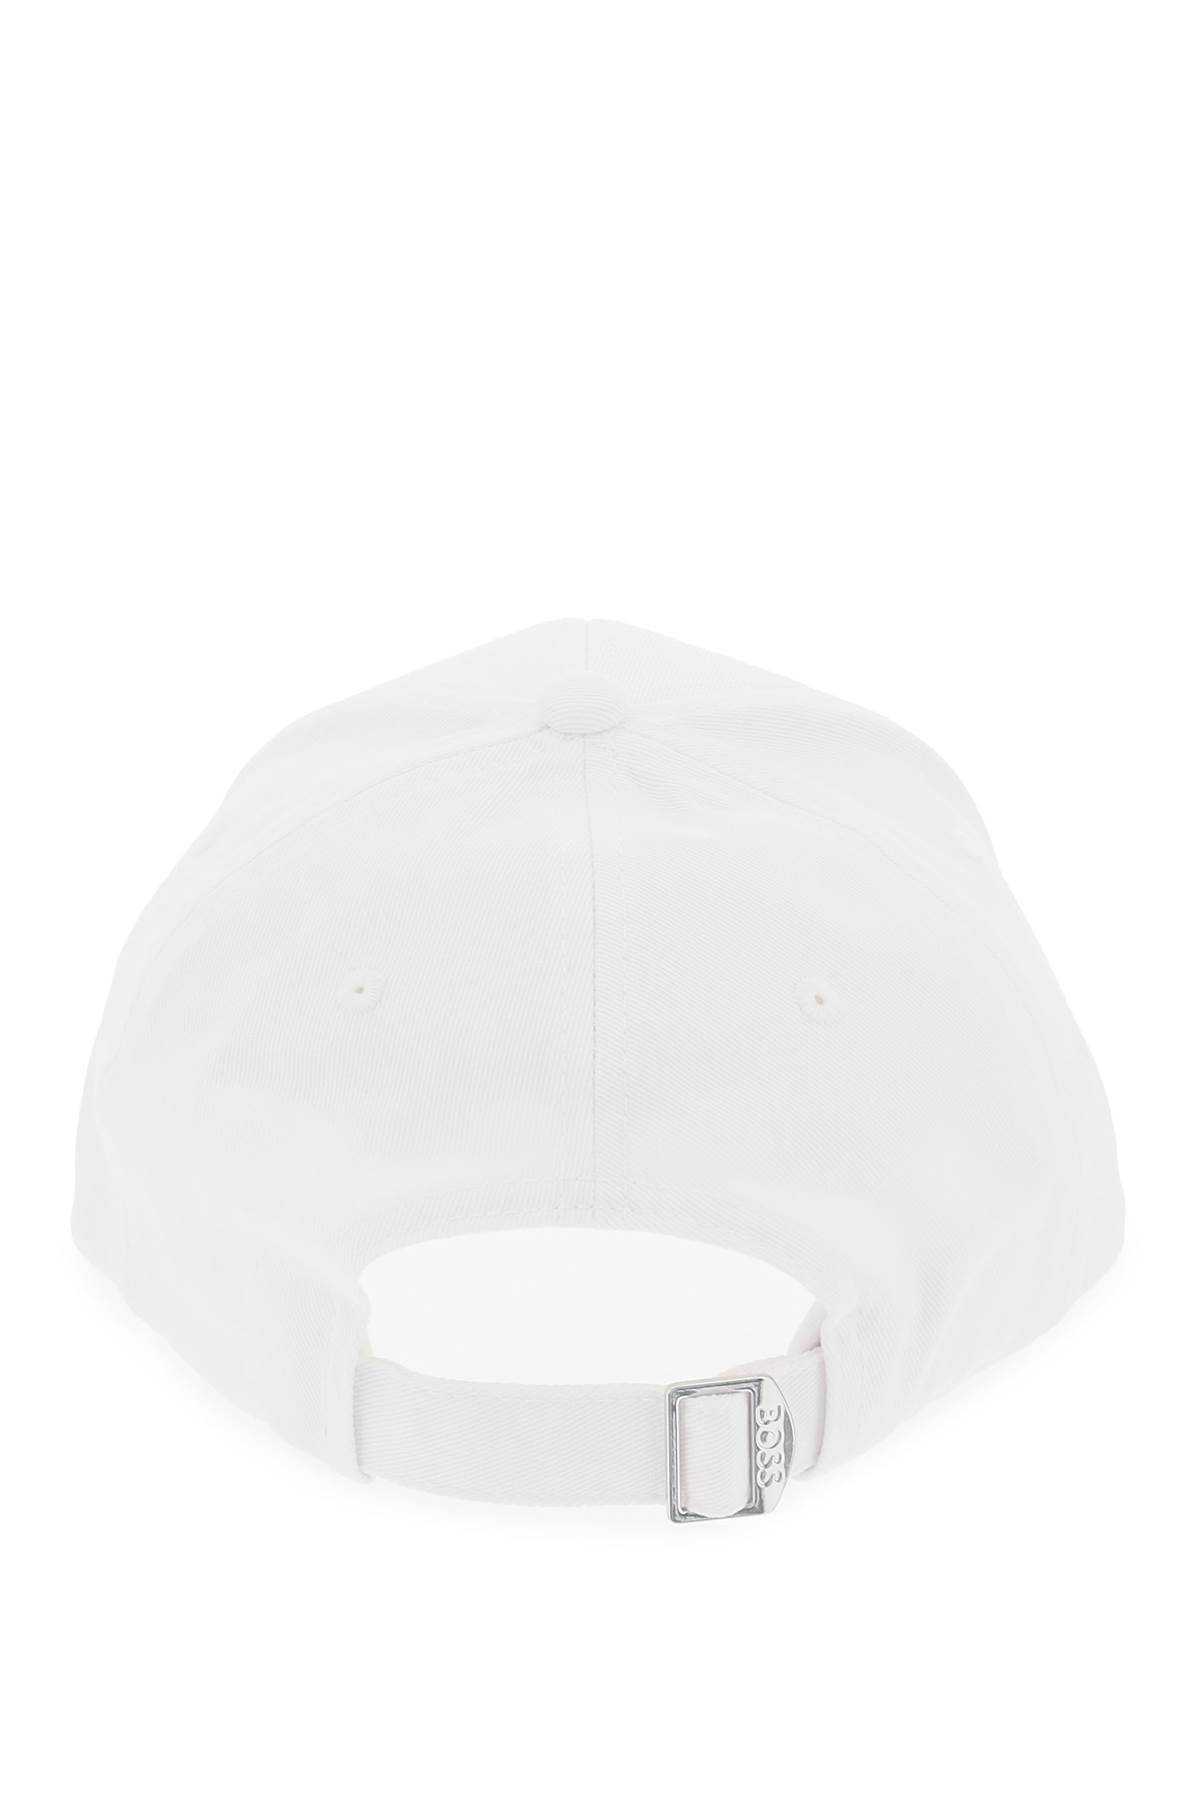 Shop Hugo Boss Baseball Cap With Embroidered Logo In Natural (white)